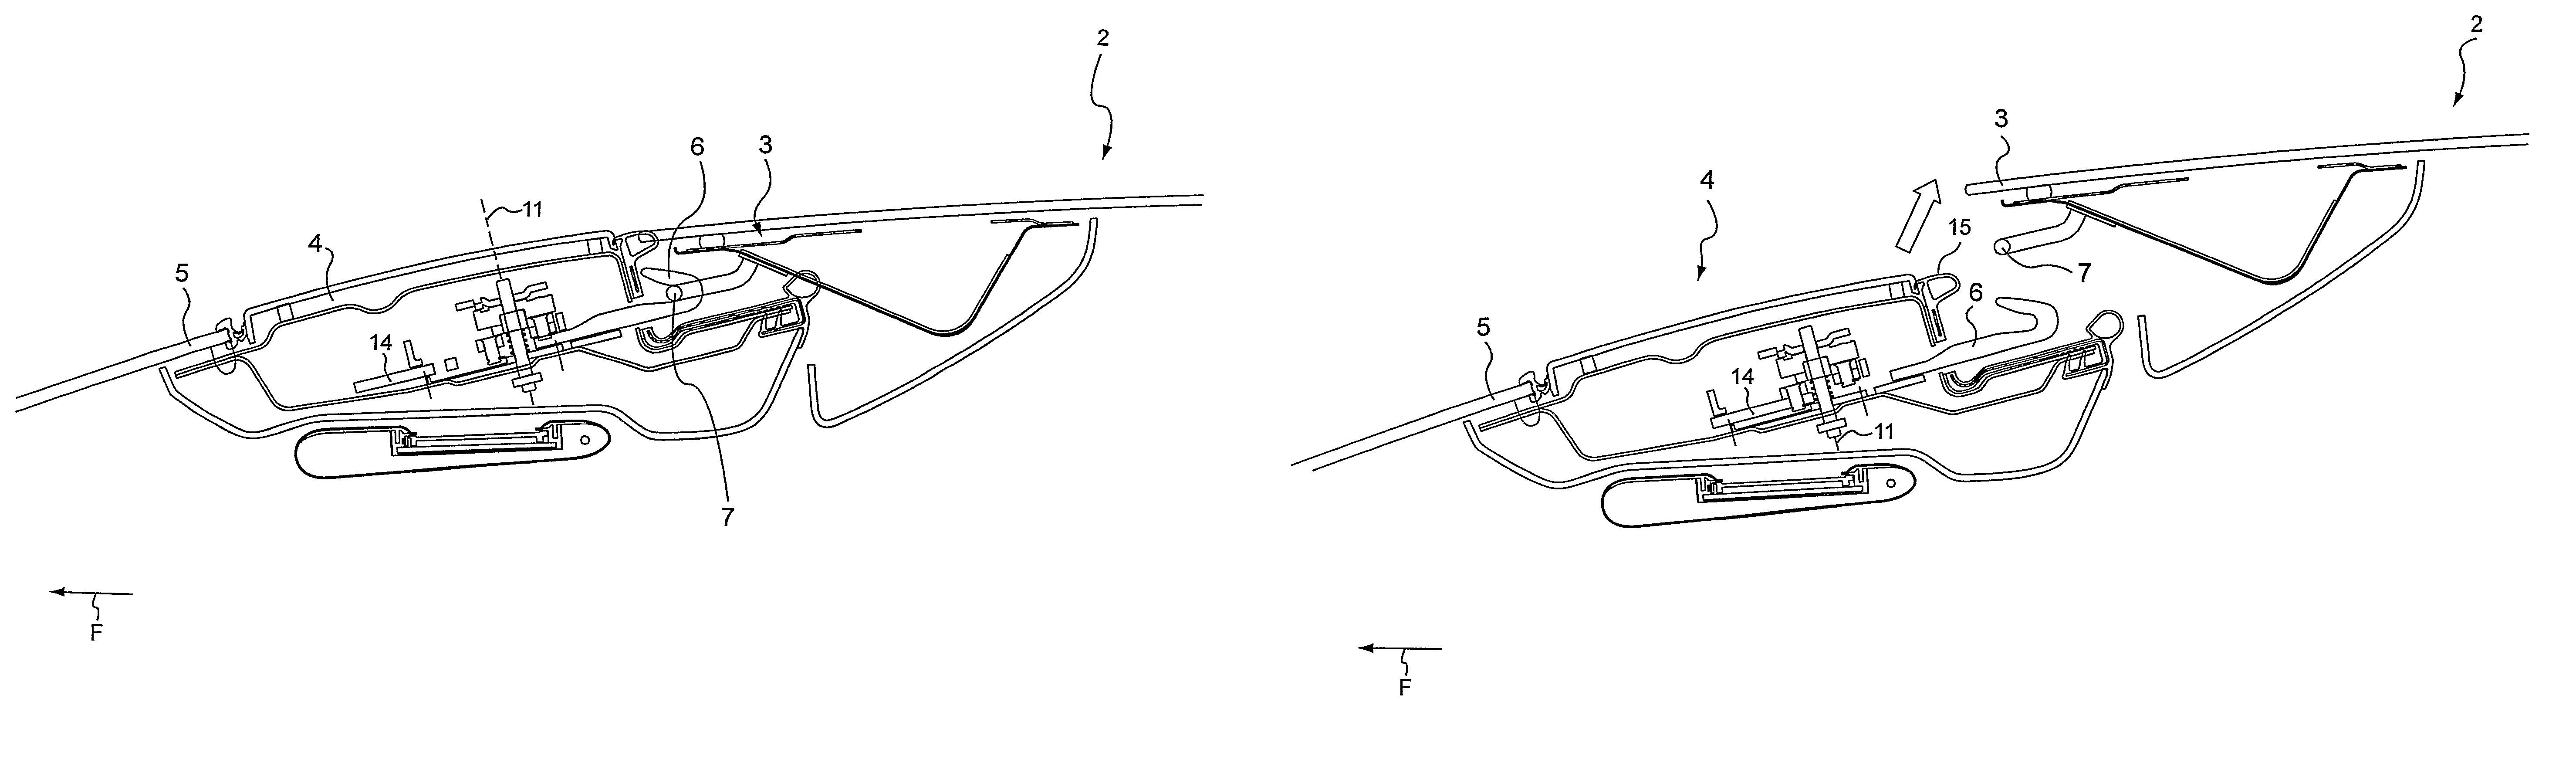 Convertible roof that latches to an upper transverse frame part of the windshield frame